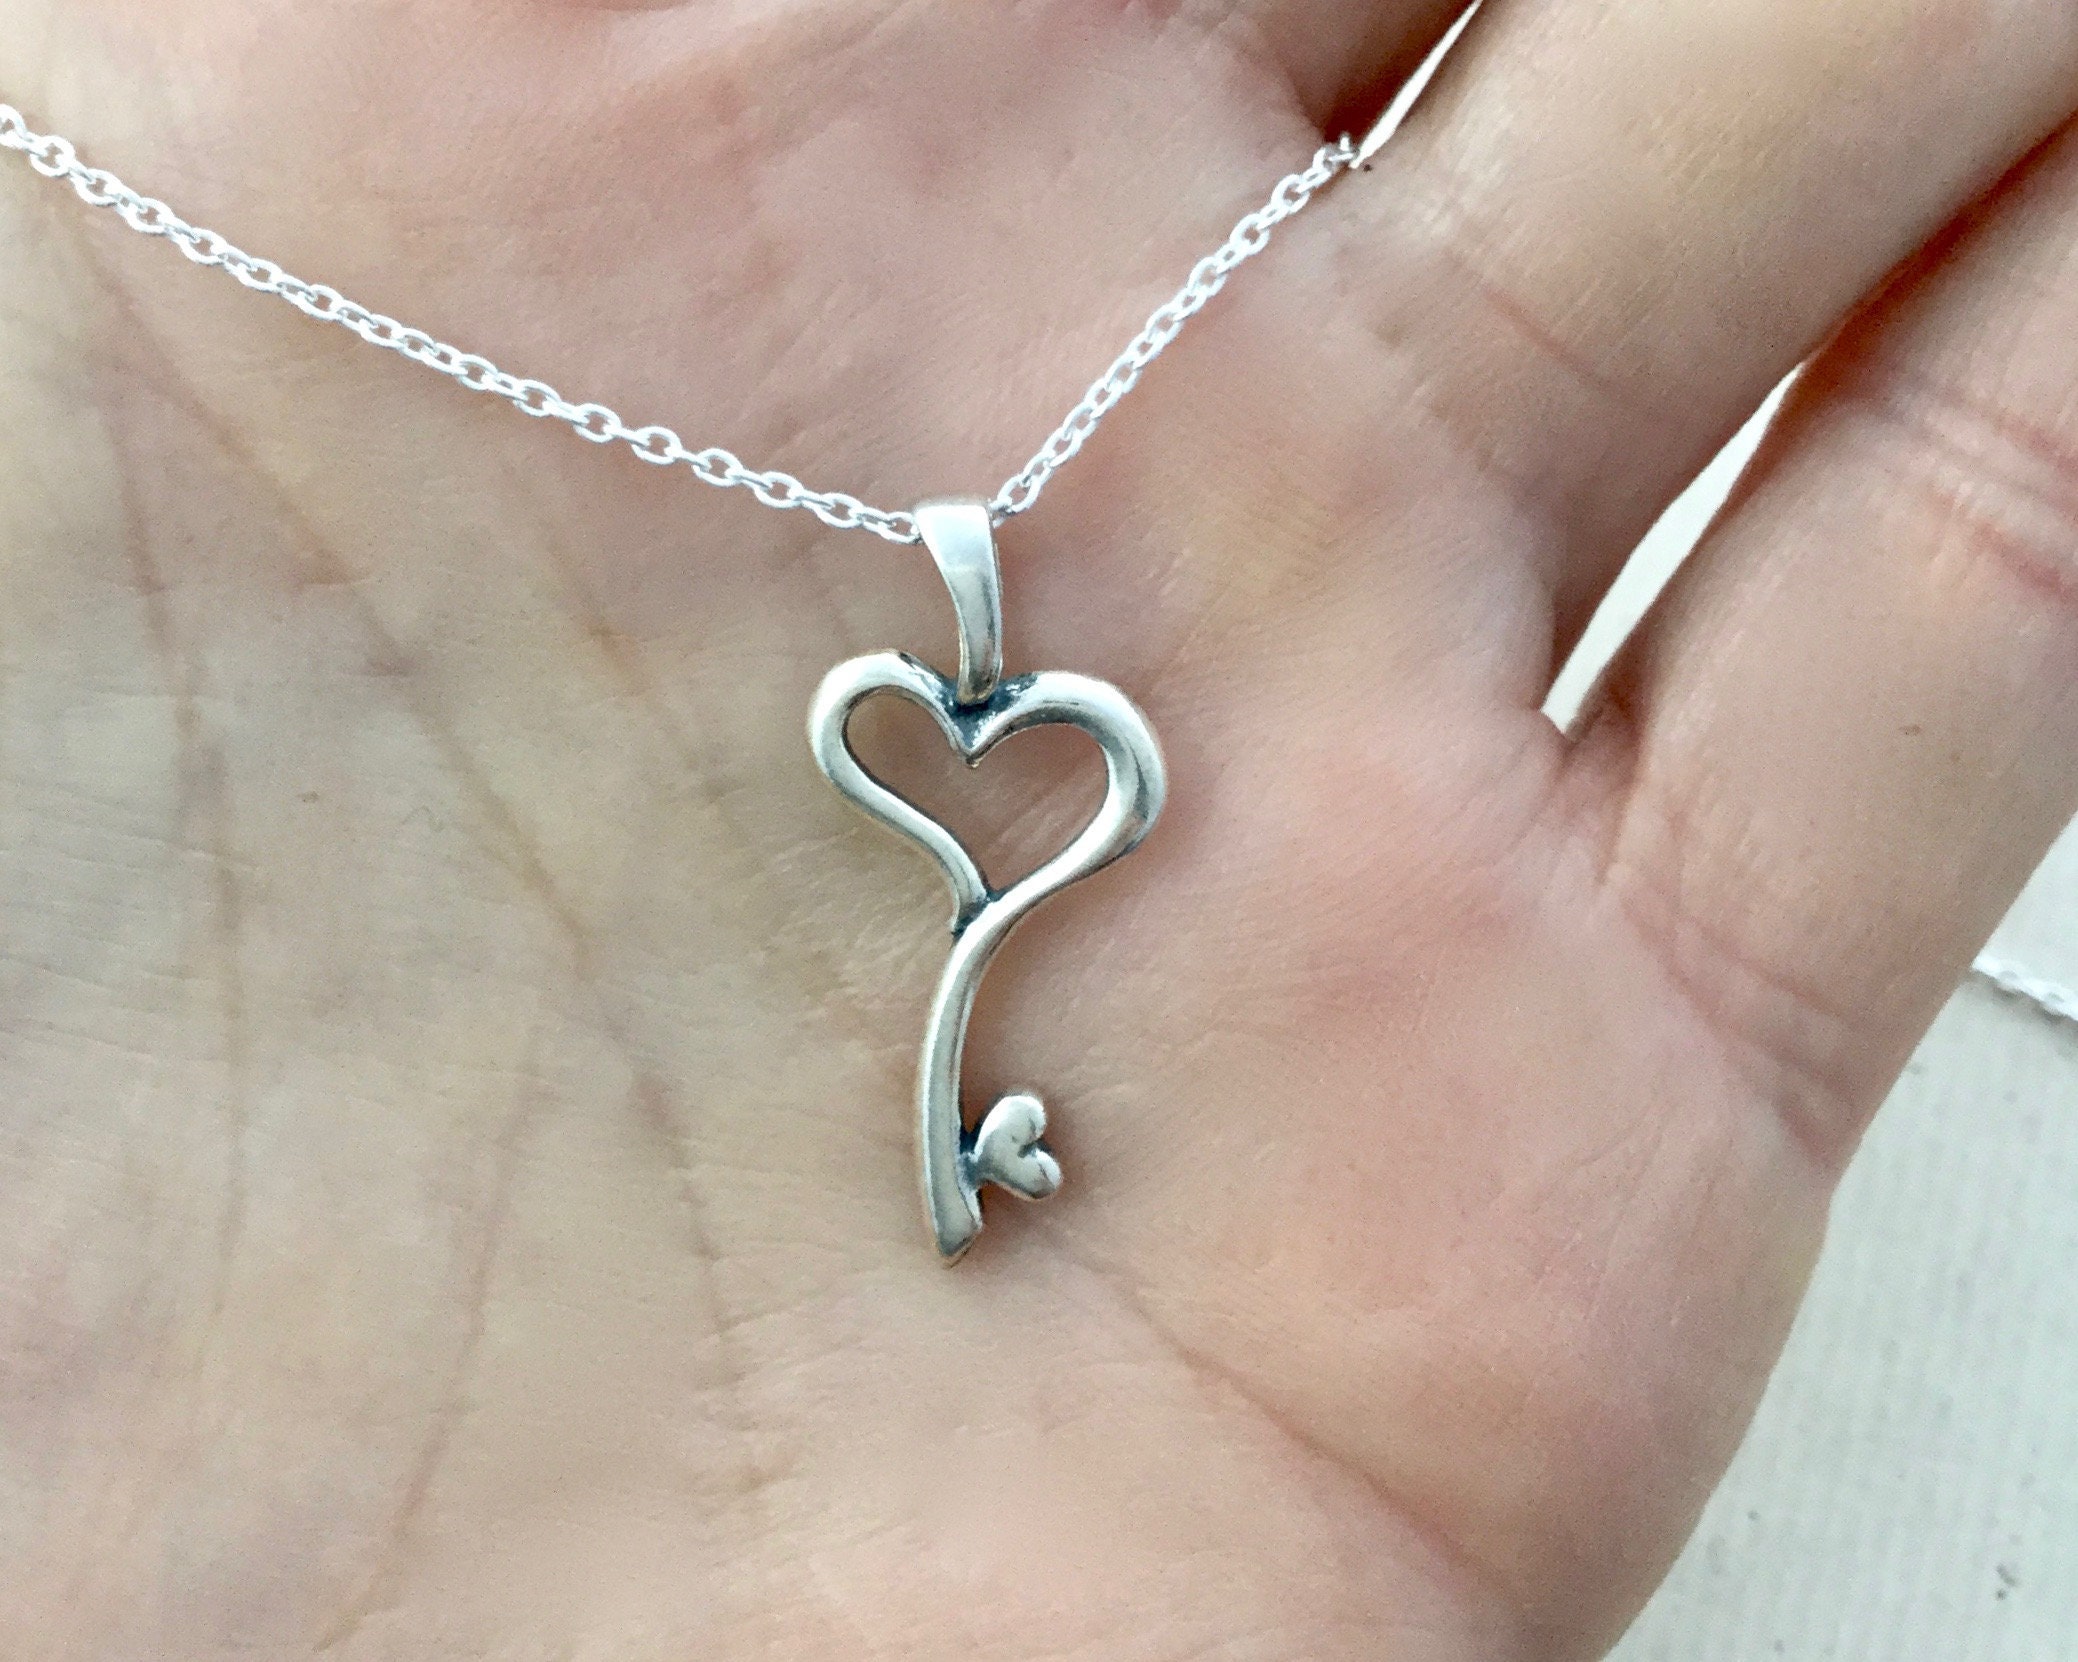 Buy Silver Key Necklace, Solid Sterling Silver Old Fashioned Key Heart  Pendant, Love Friendship, Gift for Girlfriend, Best Friend Gift N182 Online  in India 